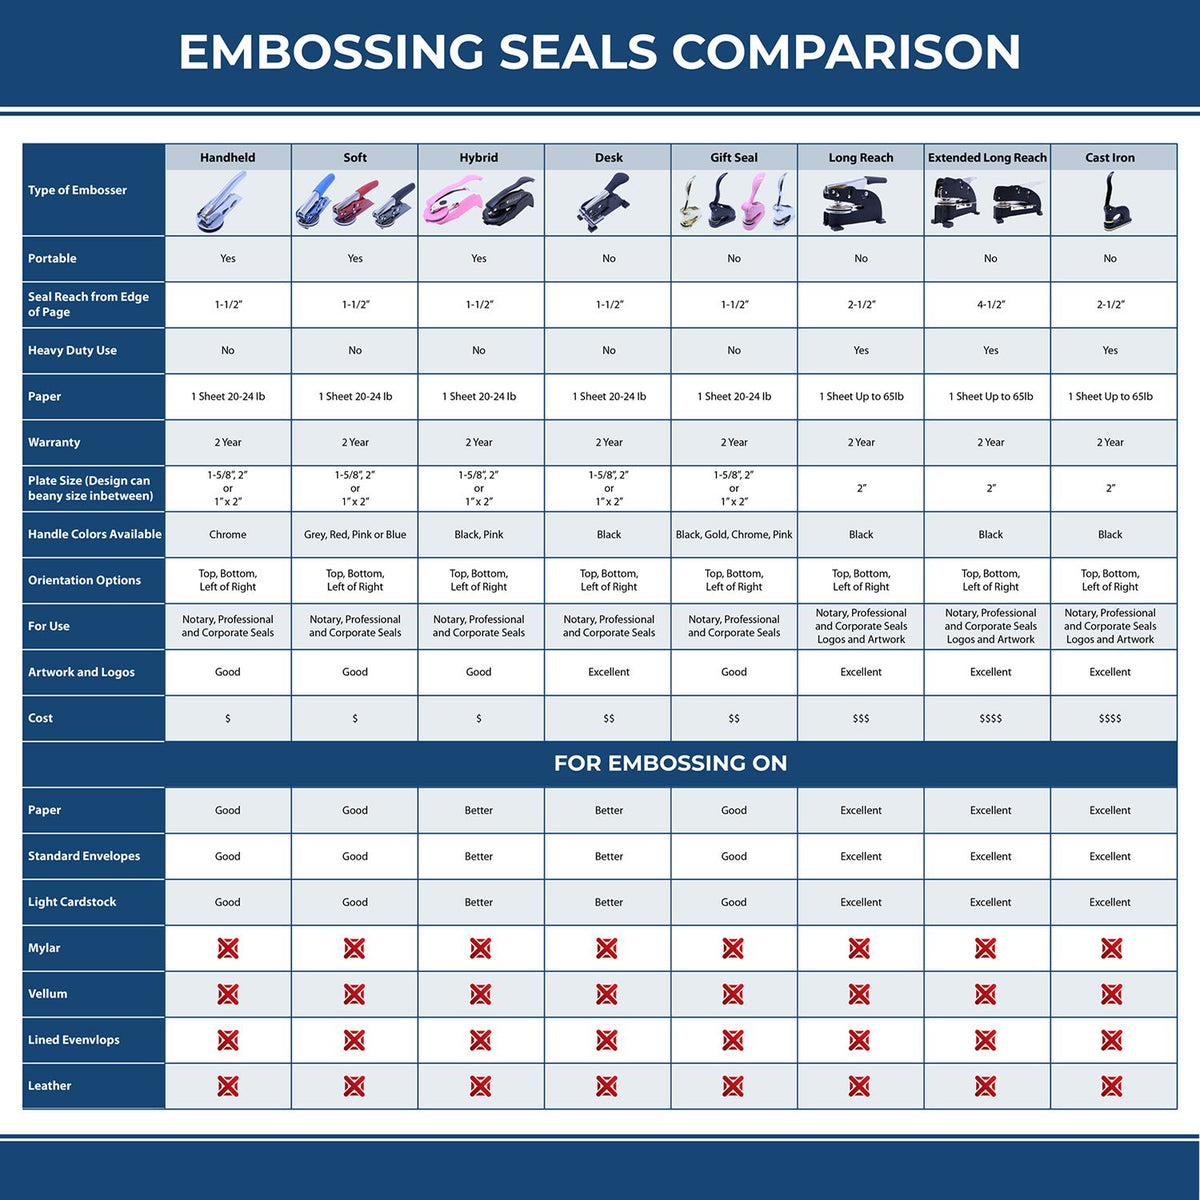 A comparison chart for the different types of mount models available for the State of Arizona Soft Land Surveyor Embossing Seal.